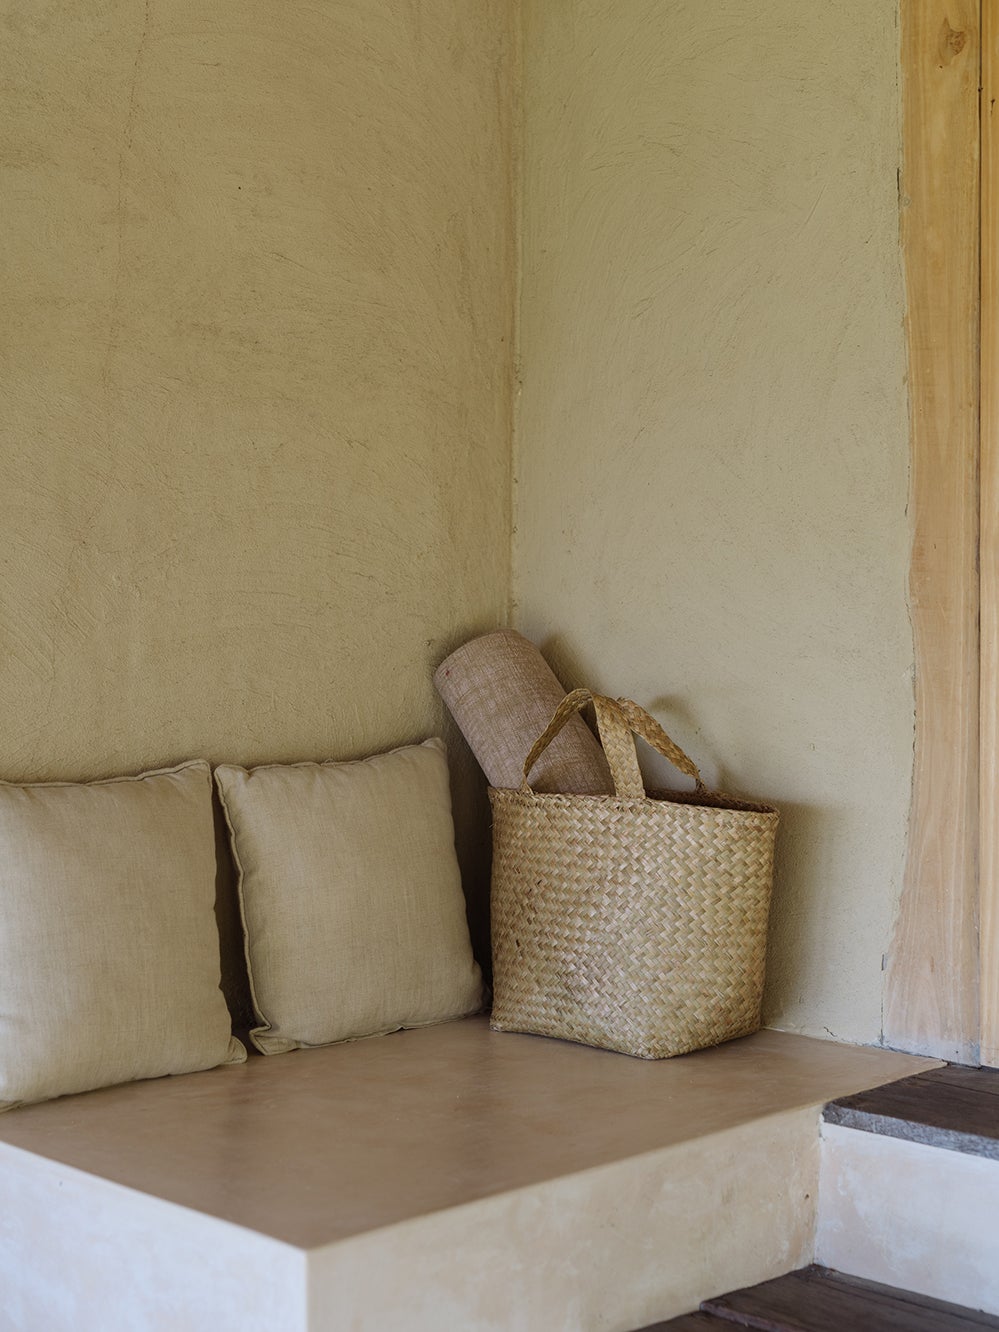 Natural woven bag with yoga mat inside stands against the wall next to the pillow